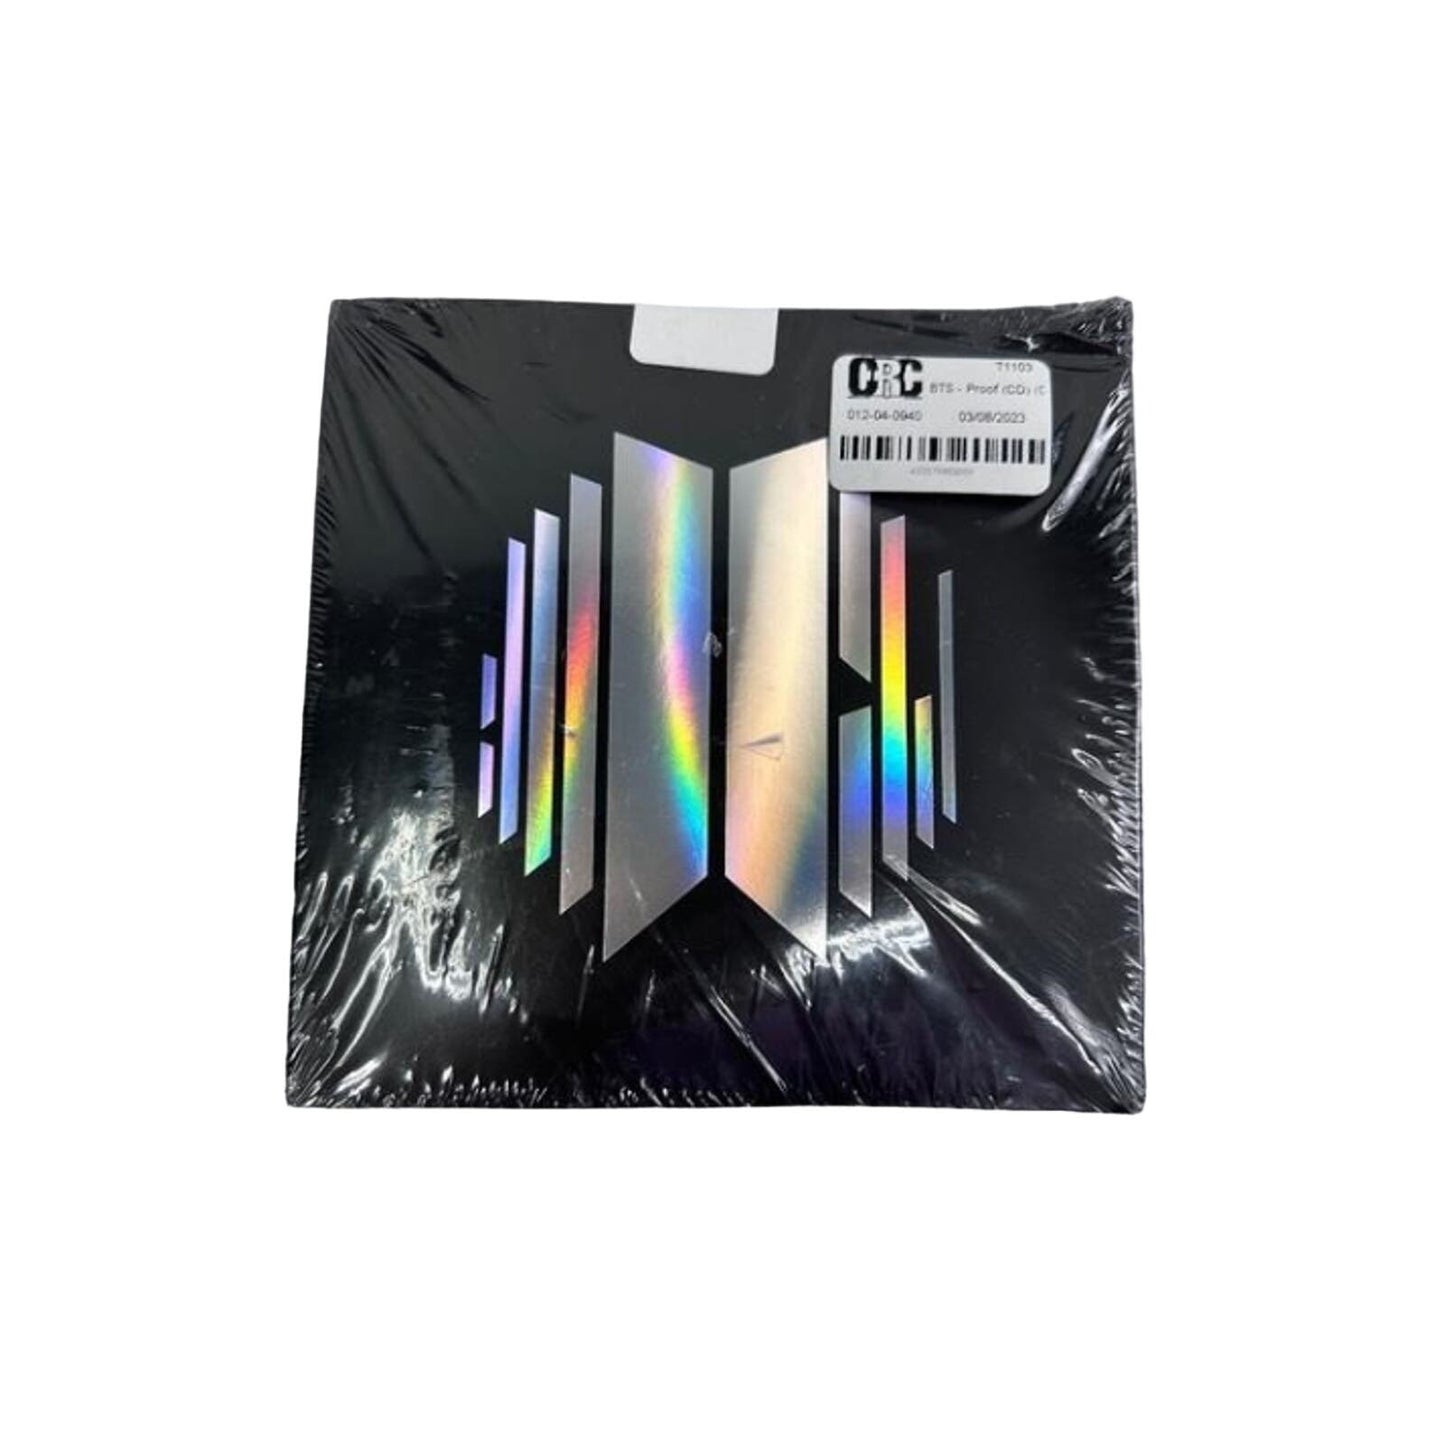 BTS - Proof (CD) (Compact Edition)